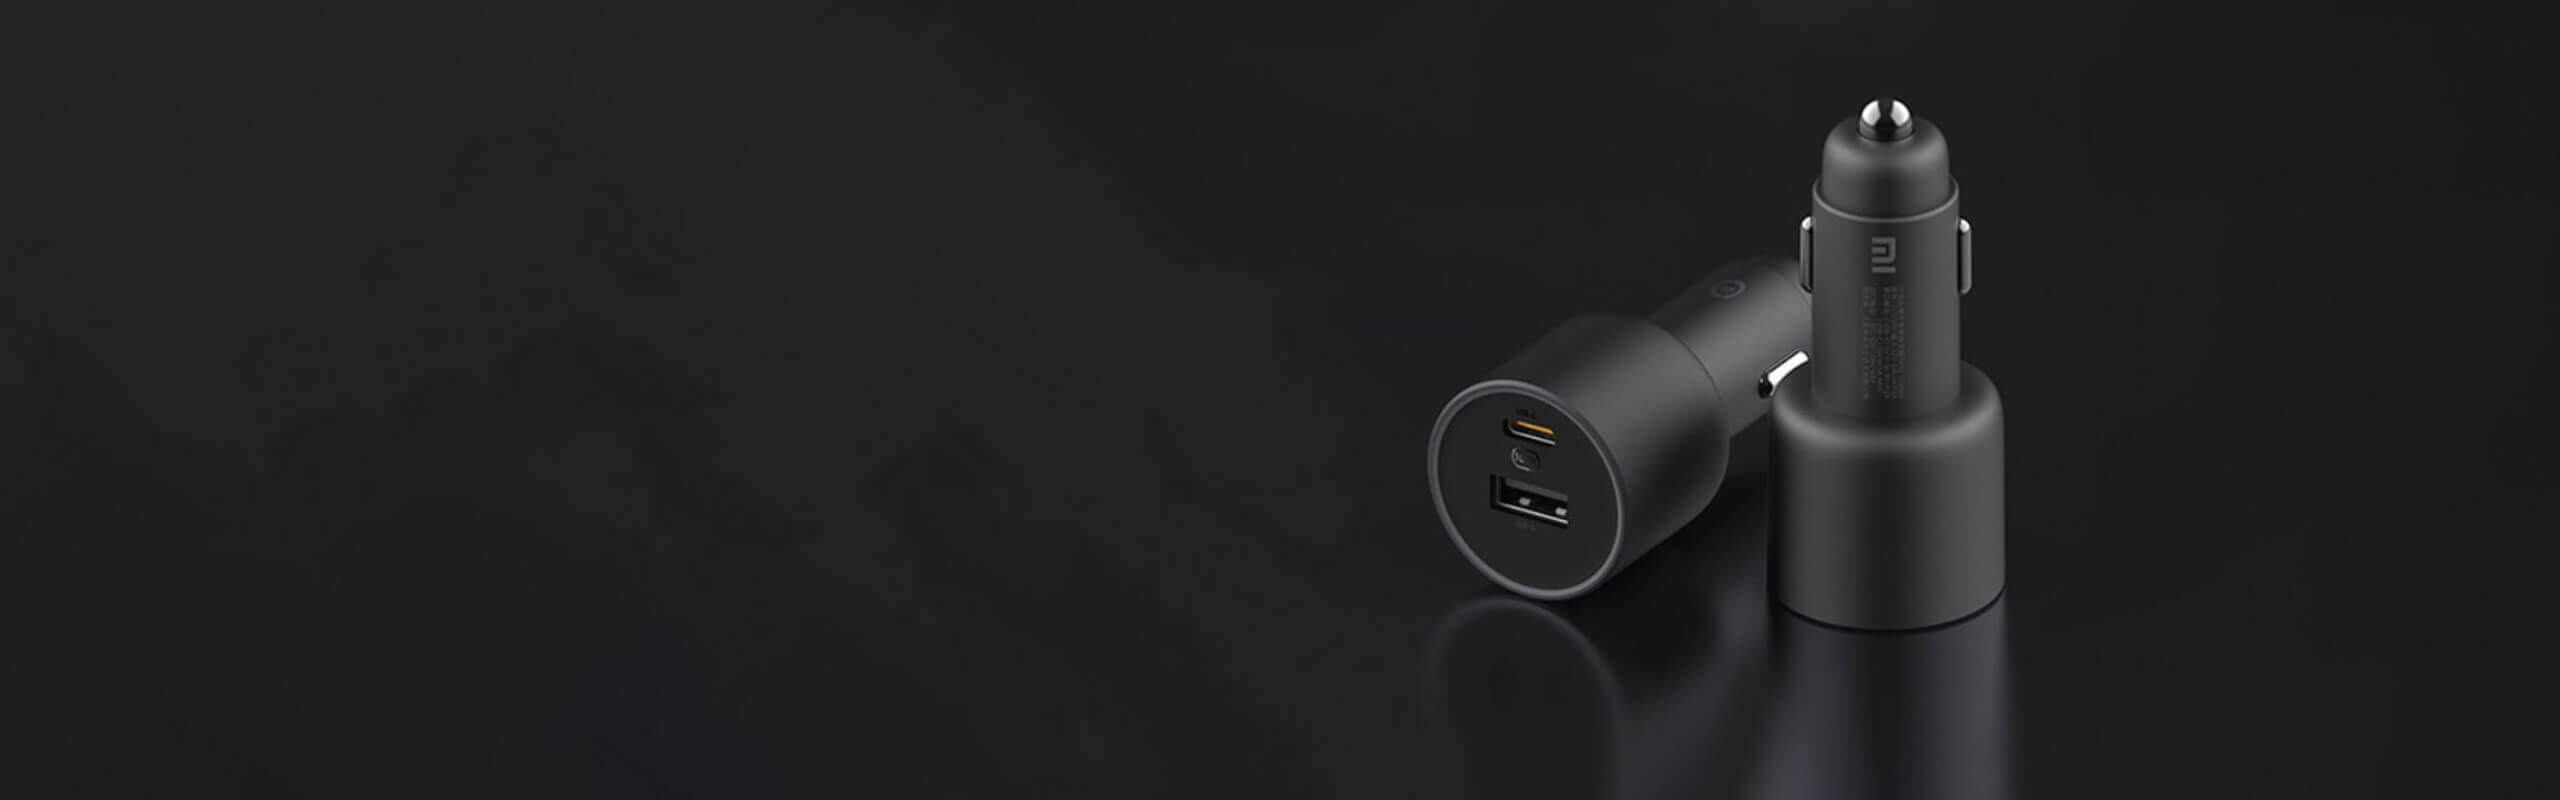 Mi Car Charger Fast Charge Version 1A1C (100W)